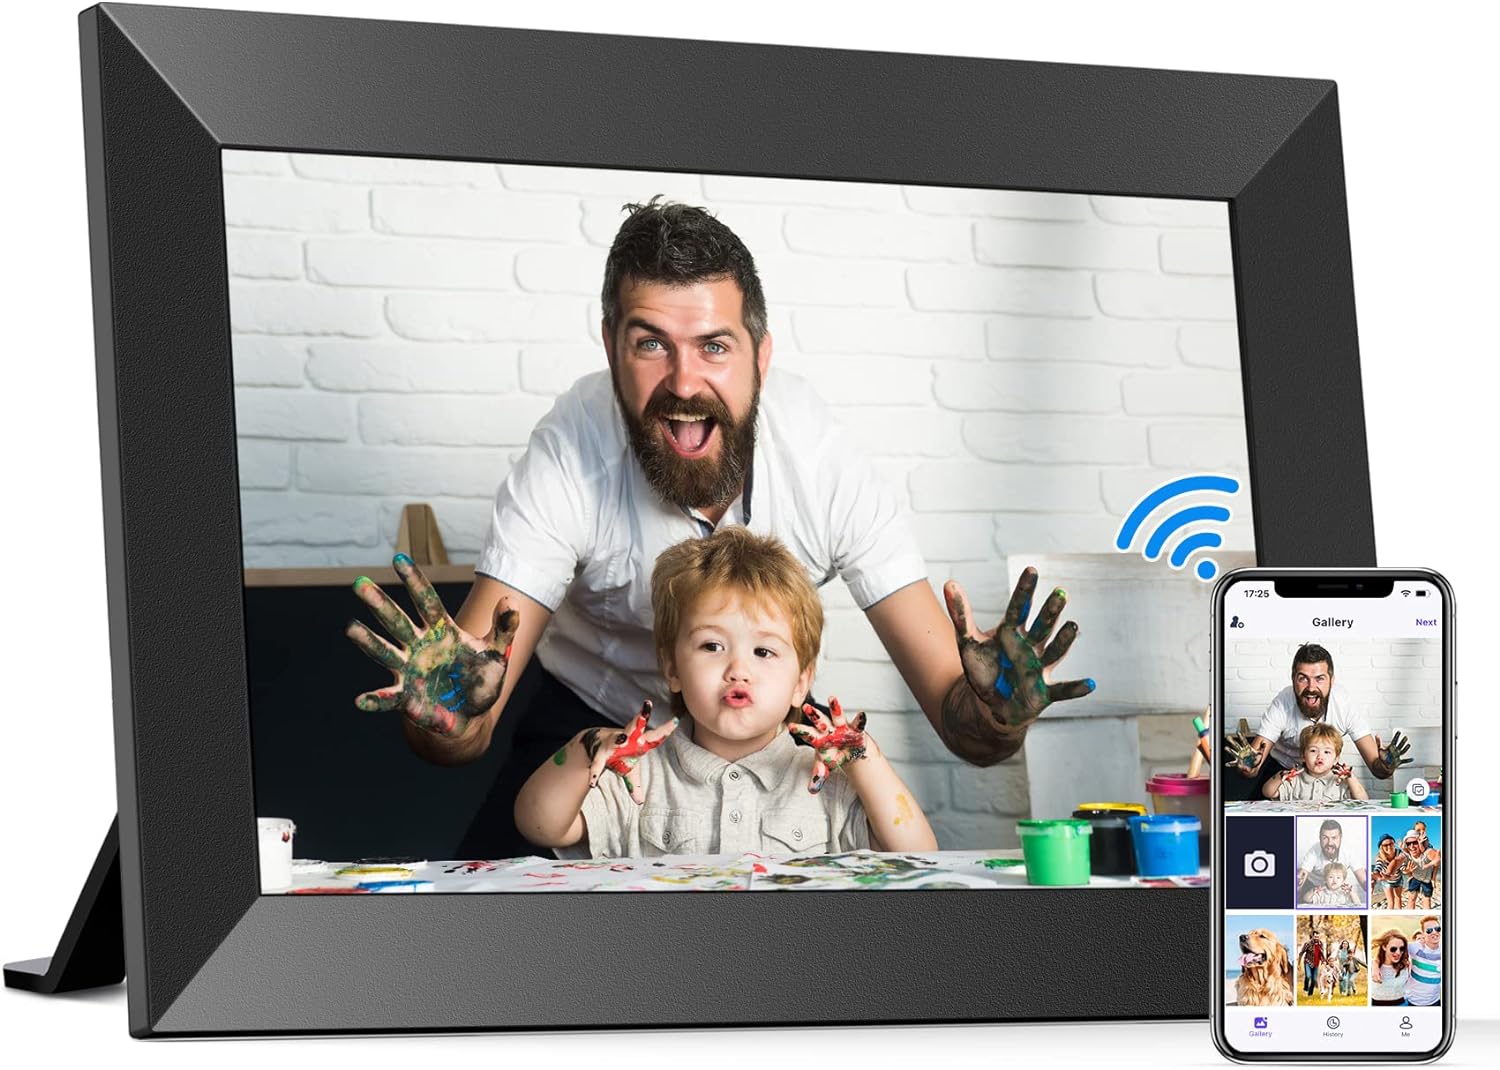 Bigasuo 10.1 Inch Wifi Digital Picture Frame, Ips Hd Touch Screen Cloud Smart Photo Frames With Built-In 16Gb Memory, Wall Mountable, Auto-Rotate, Share Photos Instantly From Anywhere-Great Gift